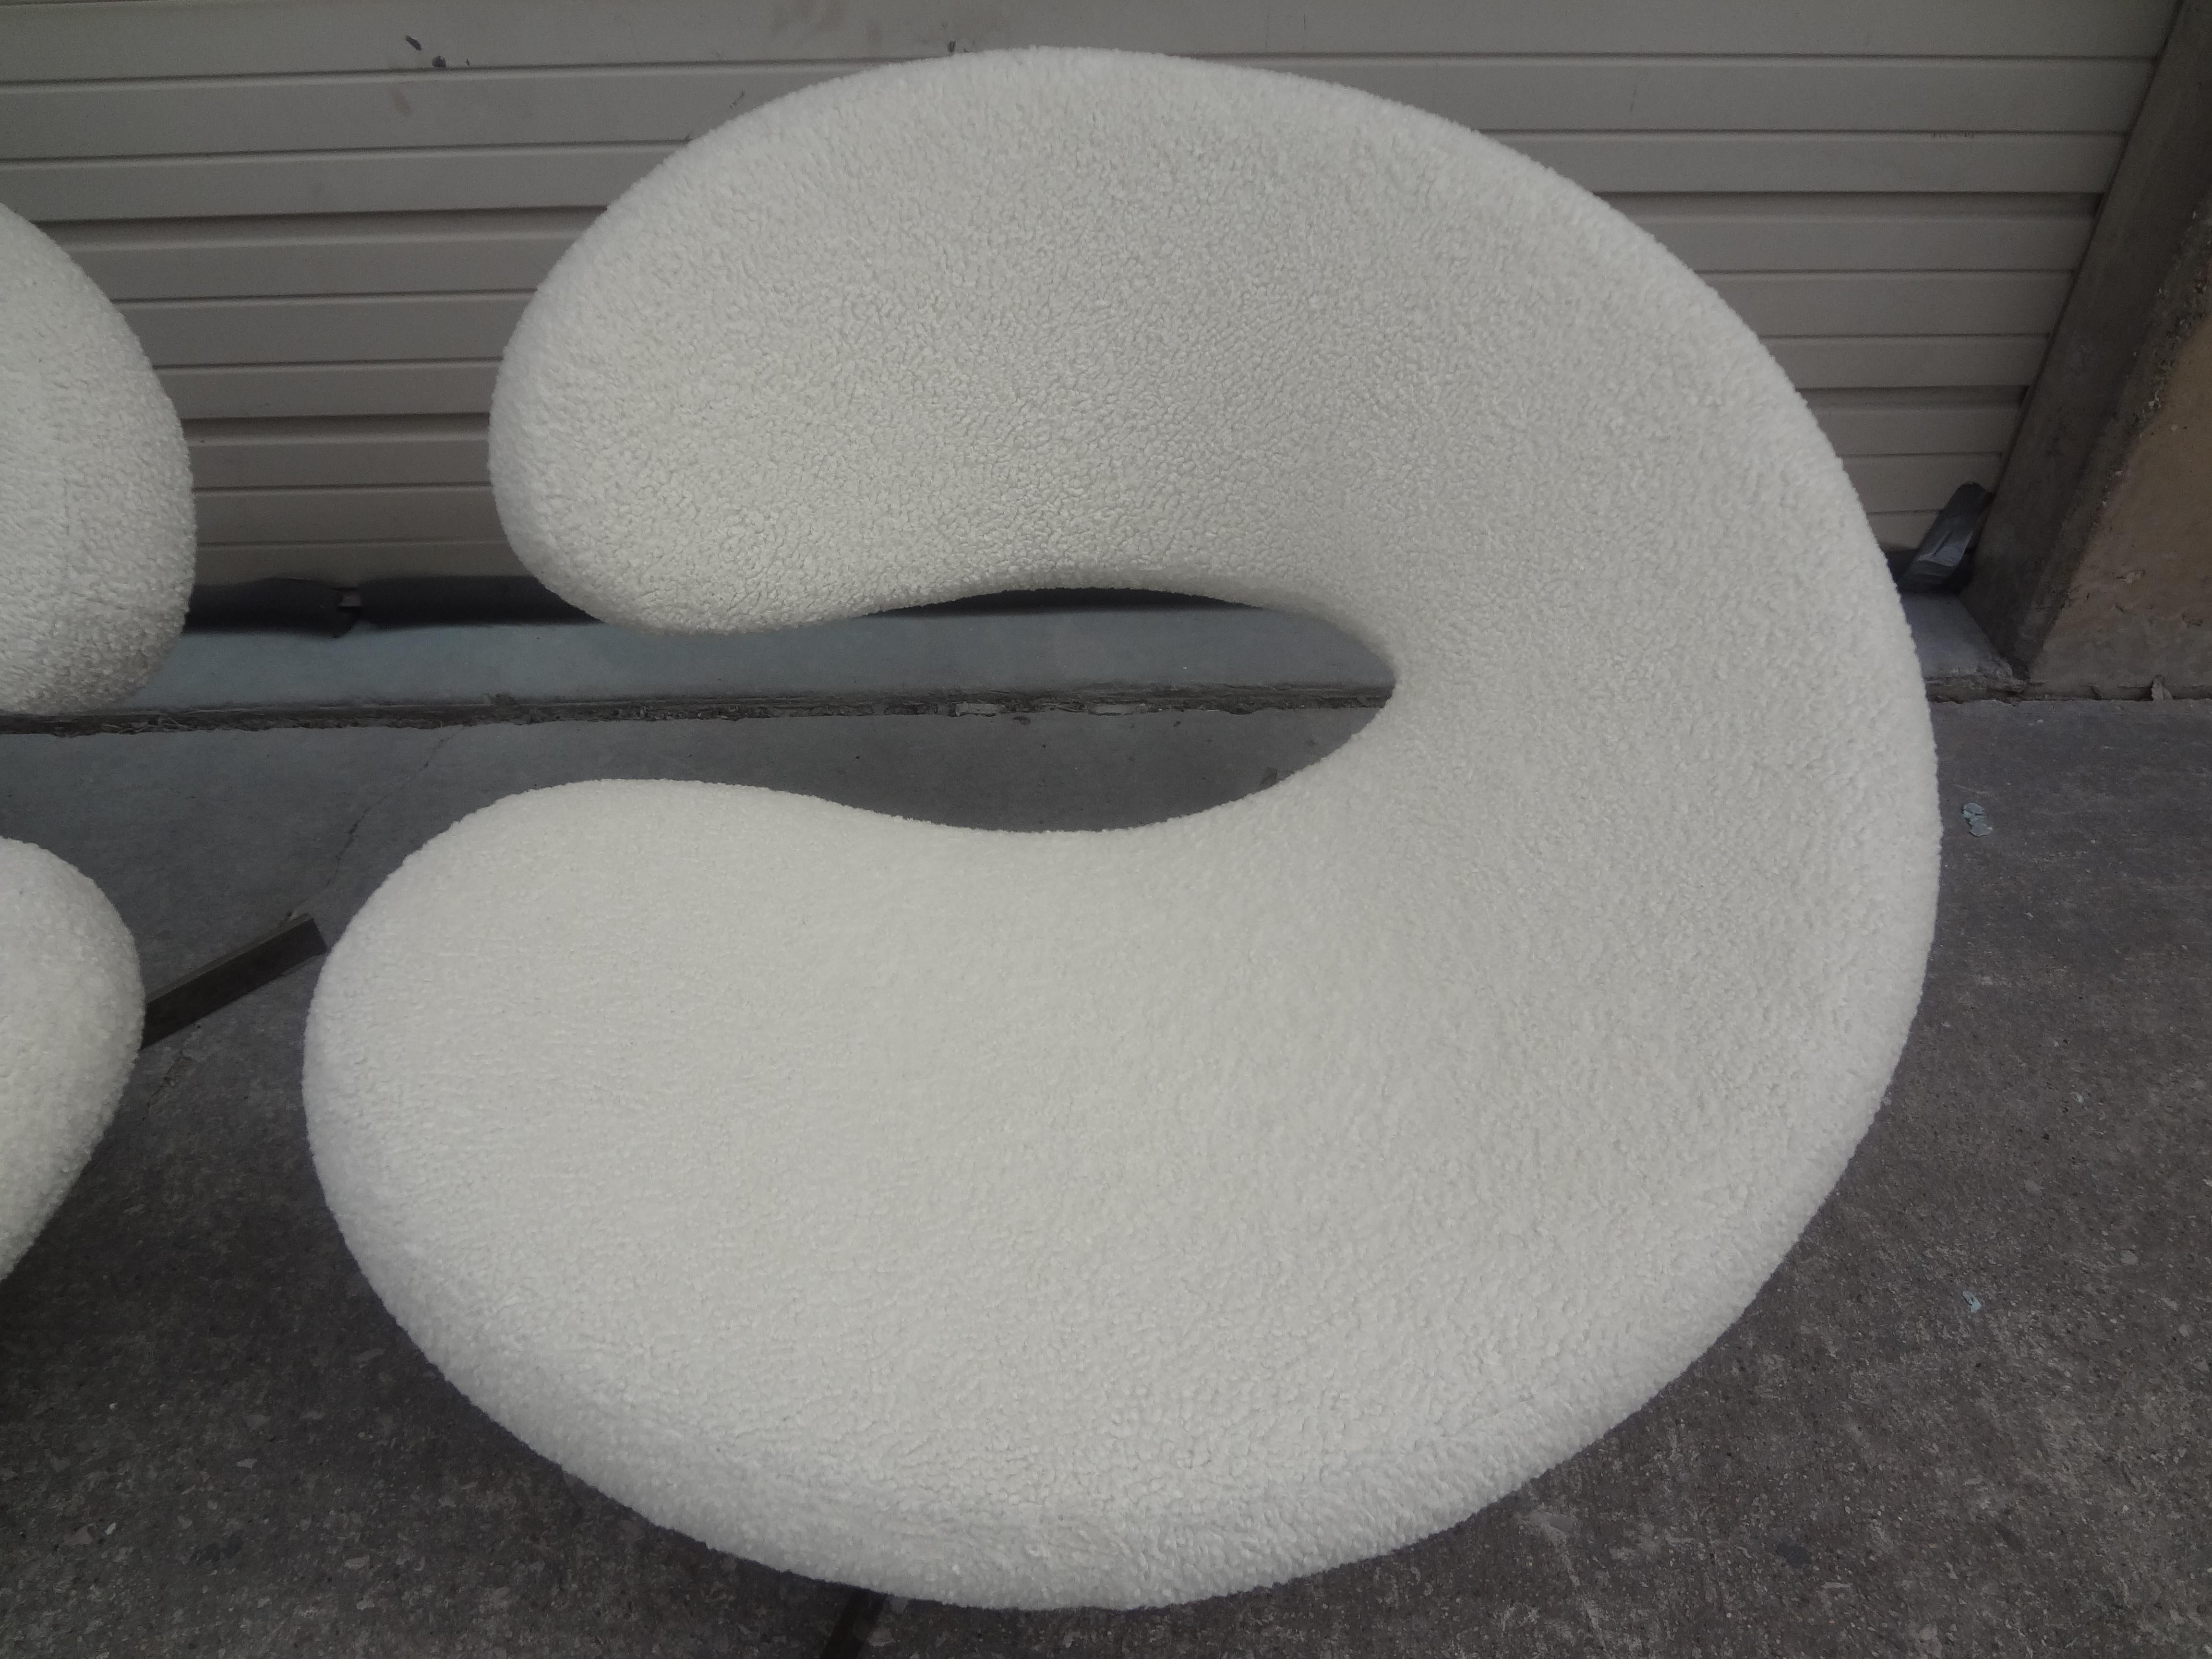 Pair of French Modernist Sculptural Swivel Chairs by Roche Bobois In Good Condition For Sale In Houston, TX